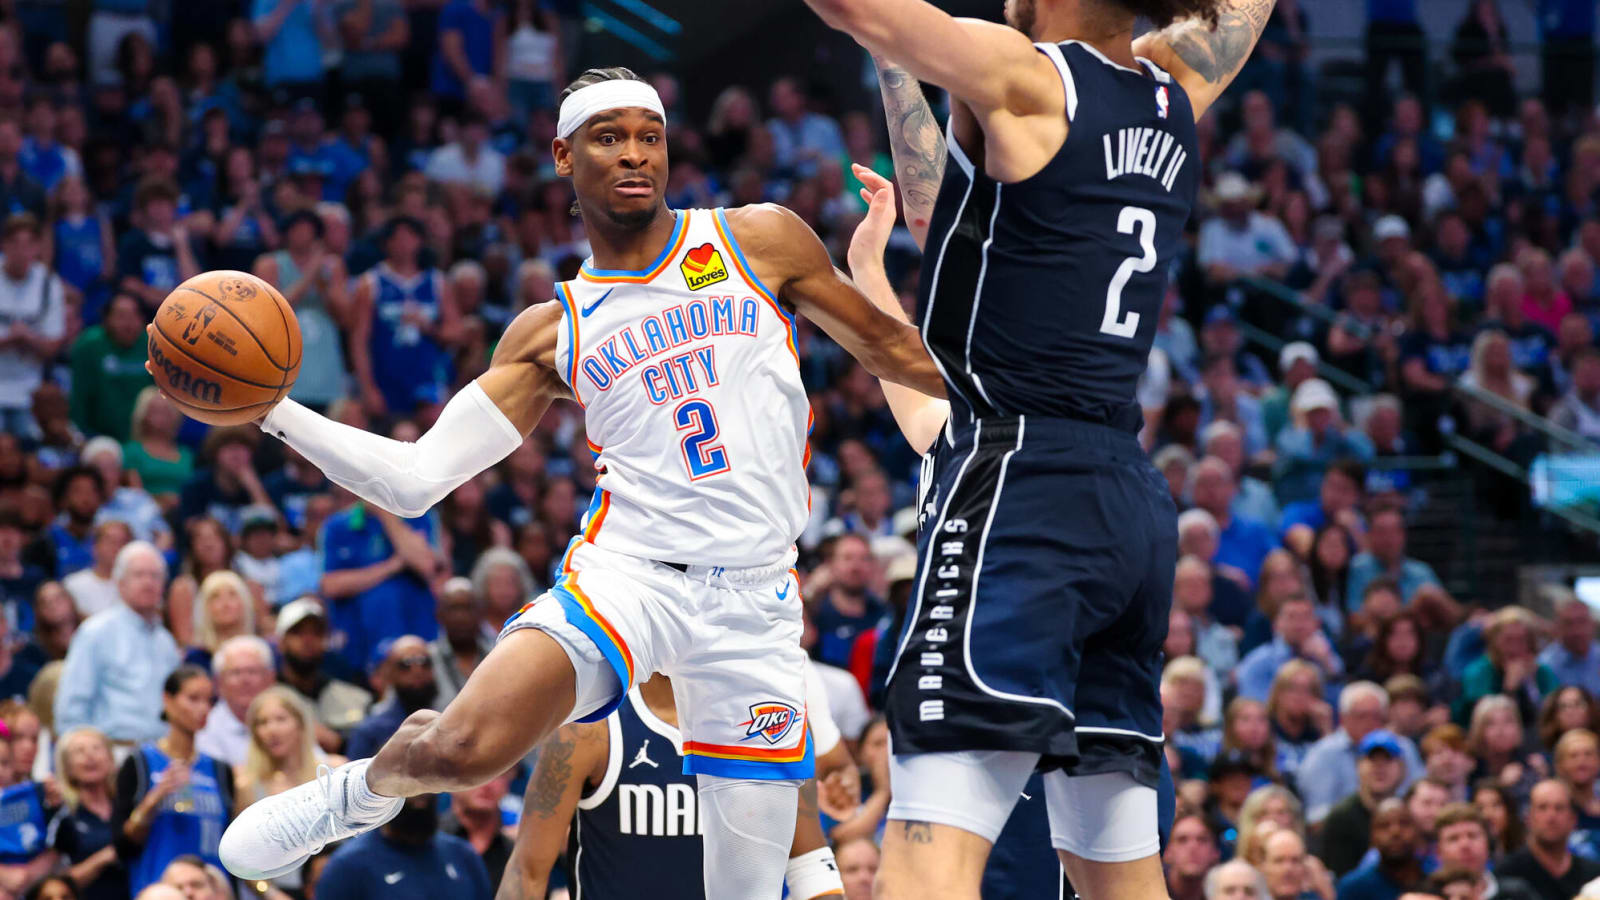 ShaiGilgeous-Alexander Guides Thunder To Game 4 Win Over Mavs, Ties Series 2-2